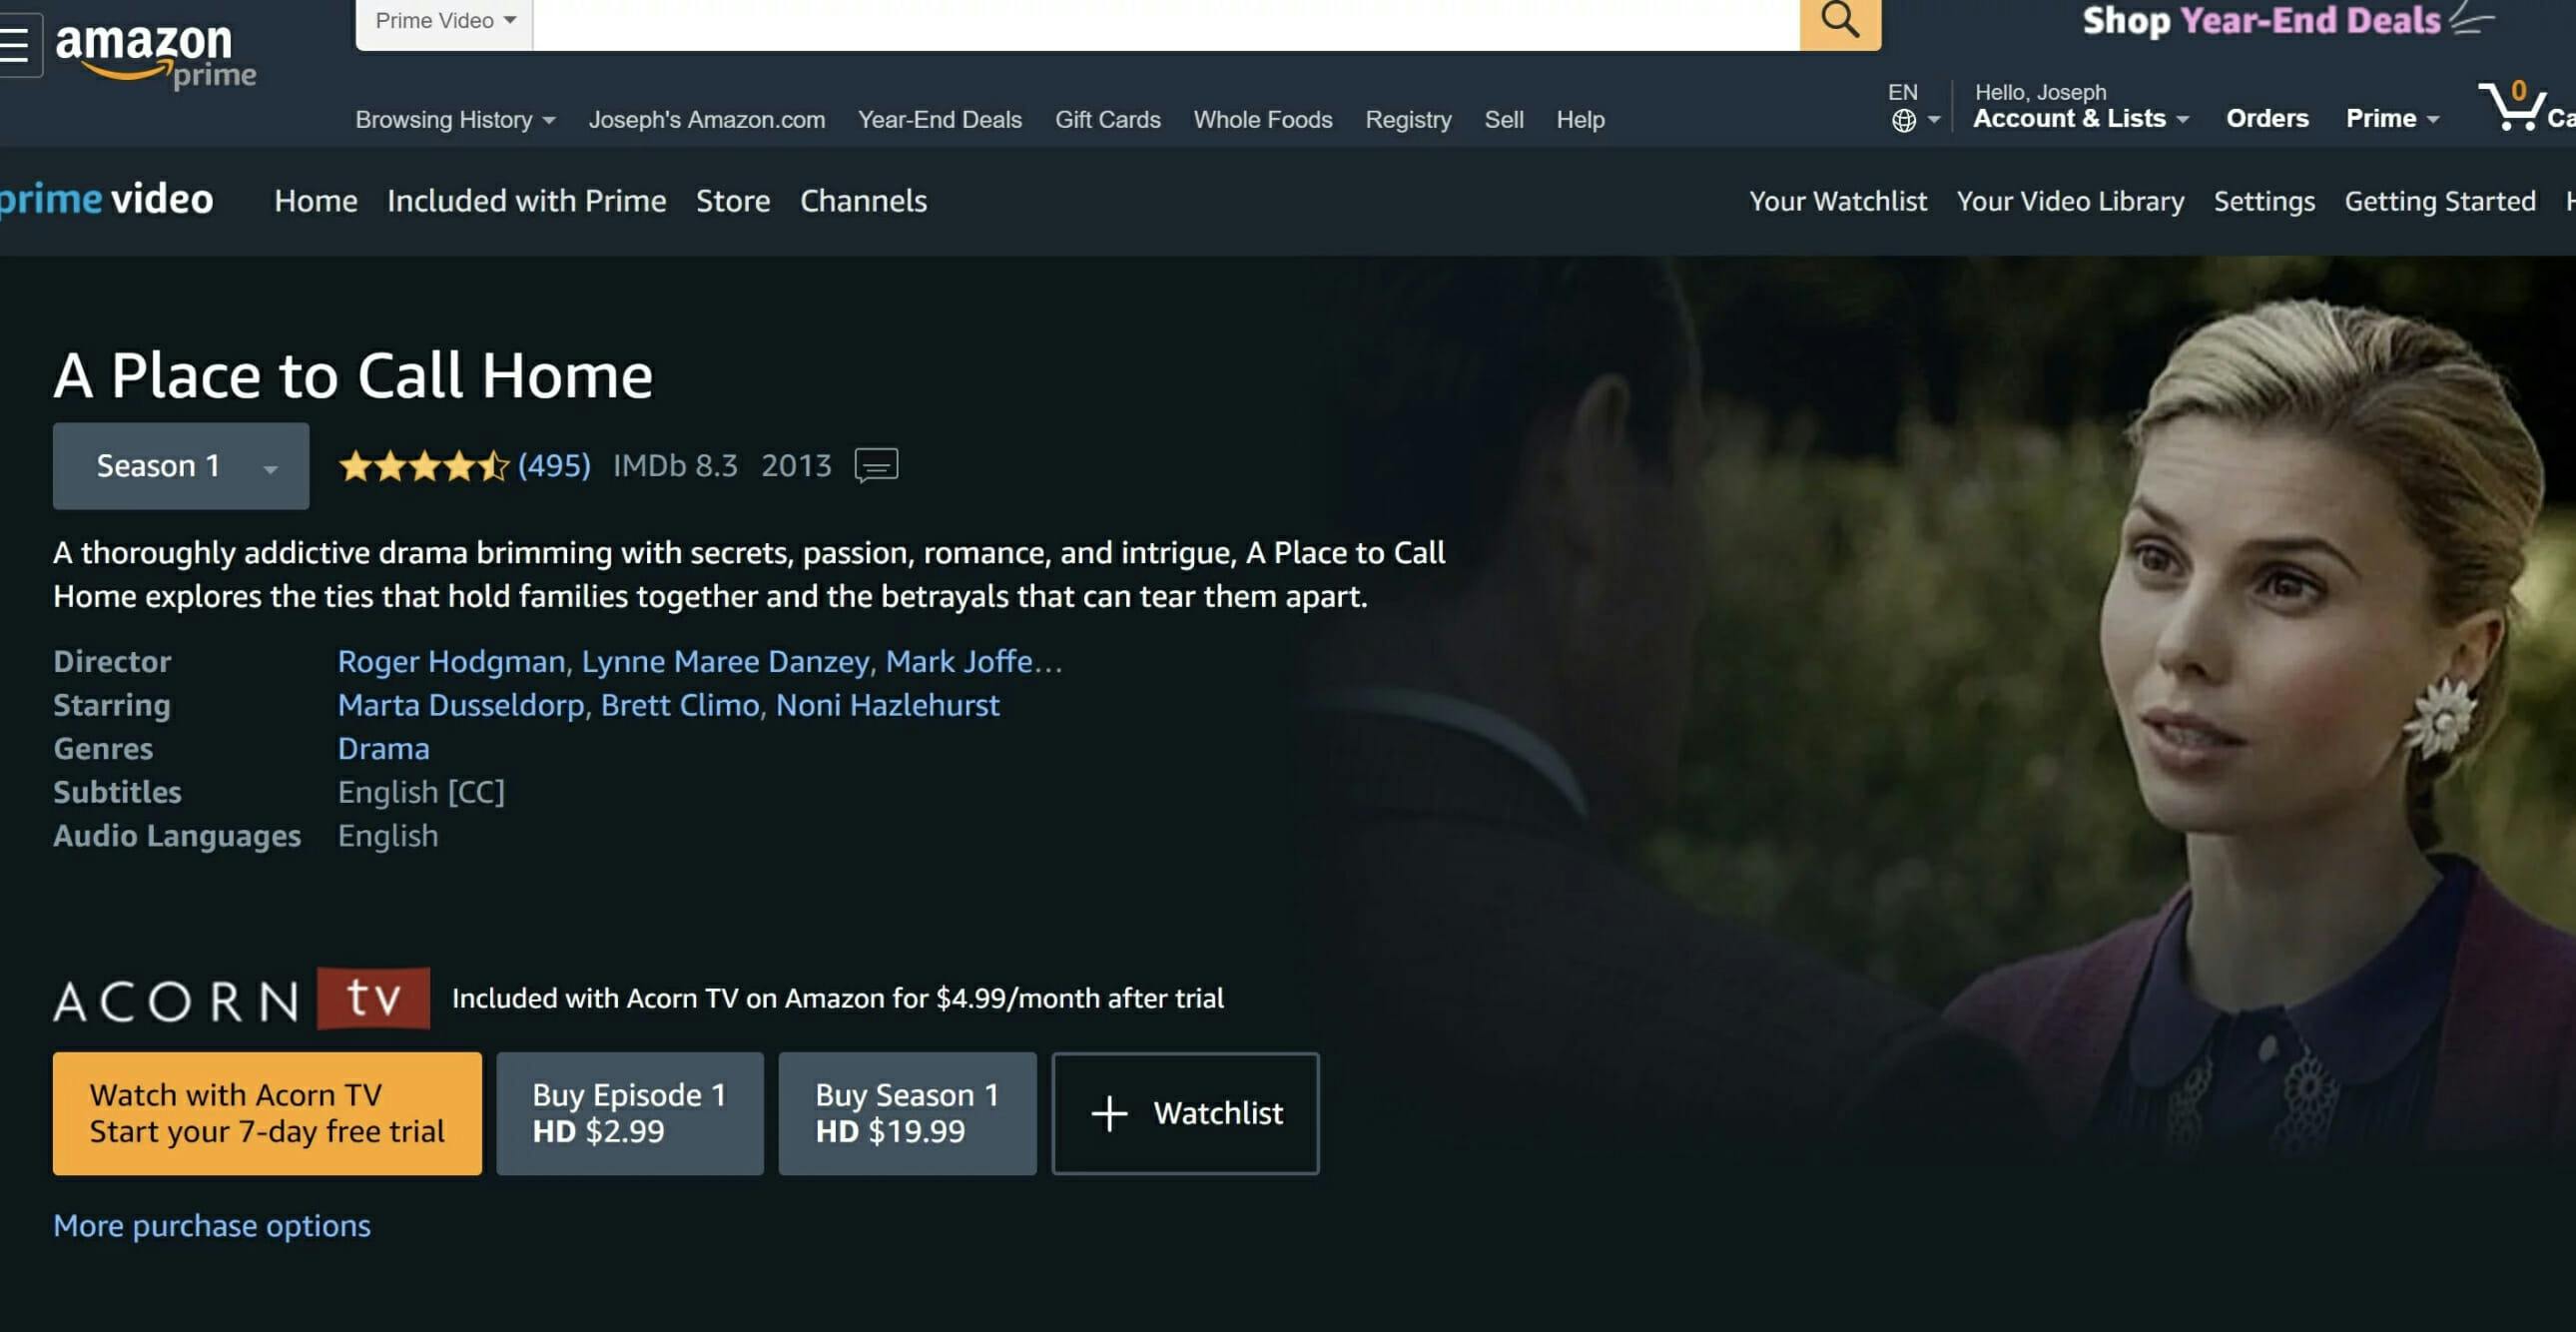 how to watch a place to call home online amazon prime video